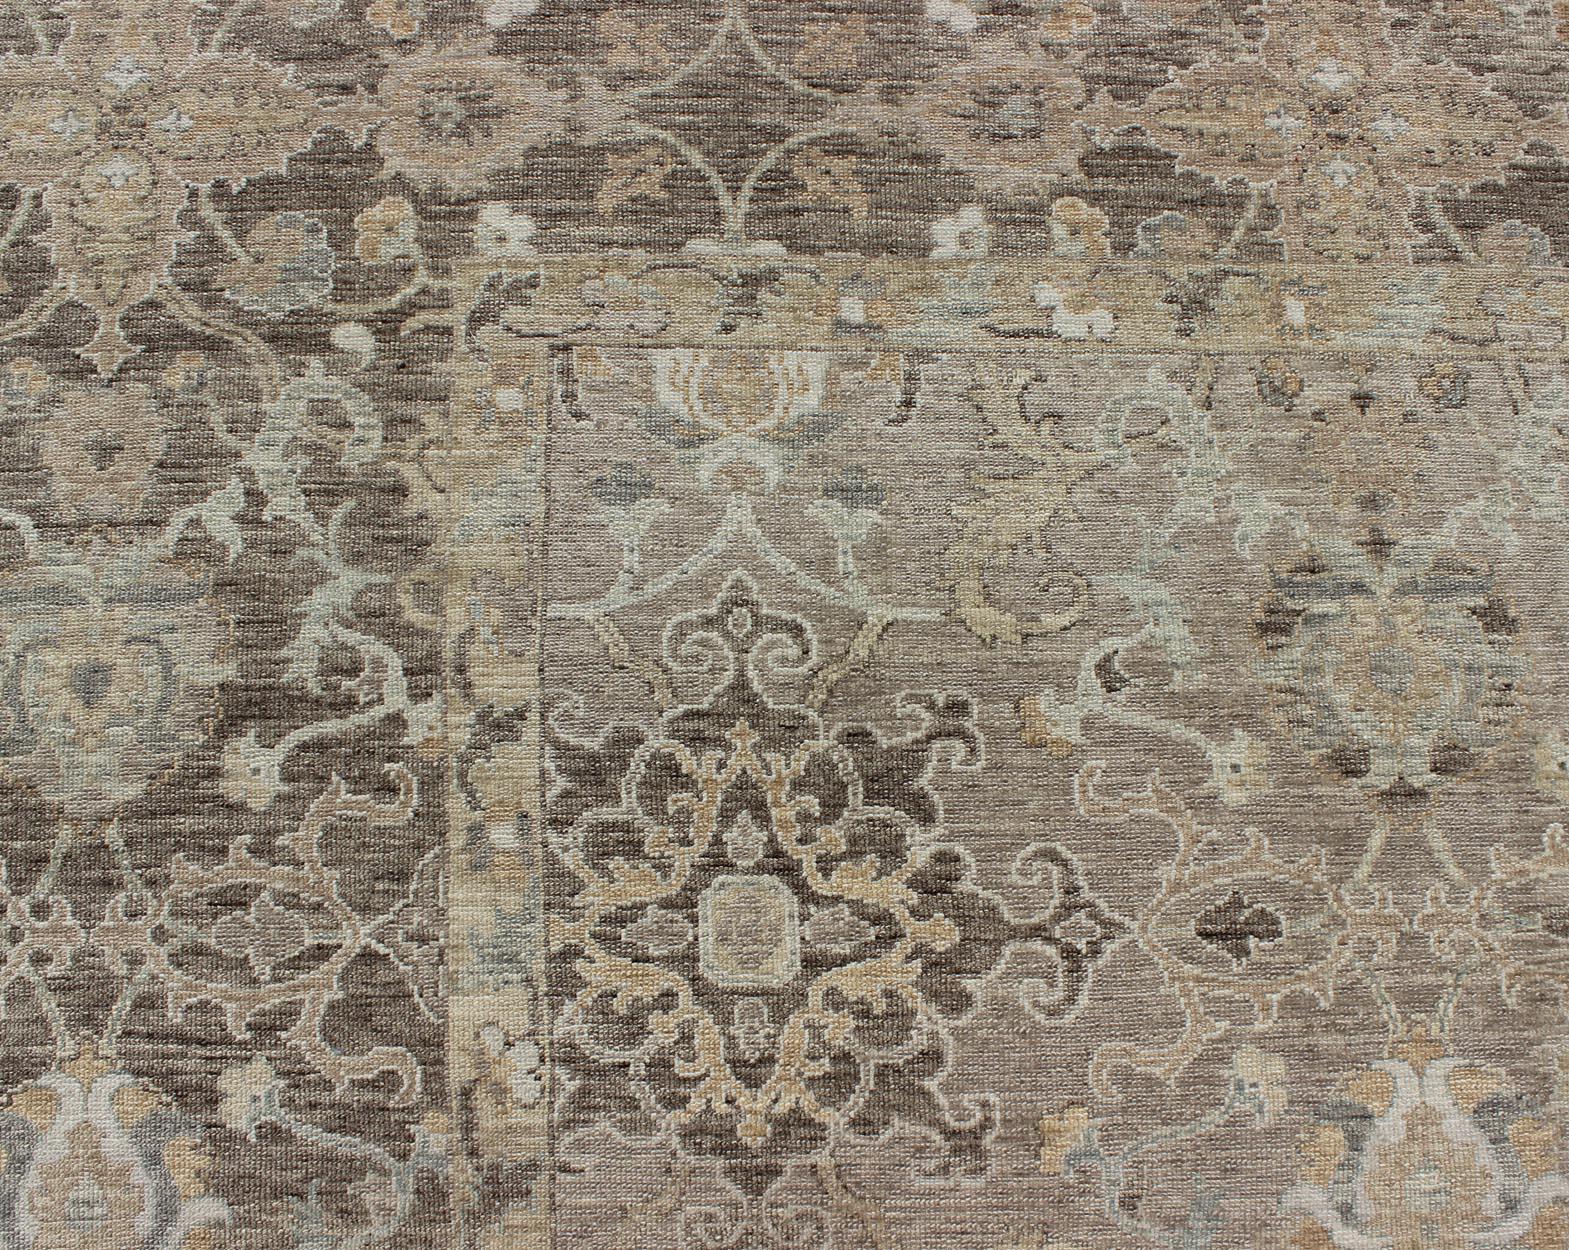 Turkish Sivas Fine Weave Rug in Taupe, Gray, Ivory and Brown and Cream Colors For Sale 3